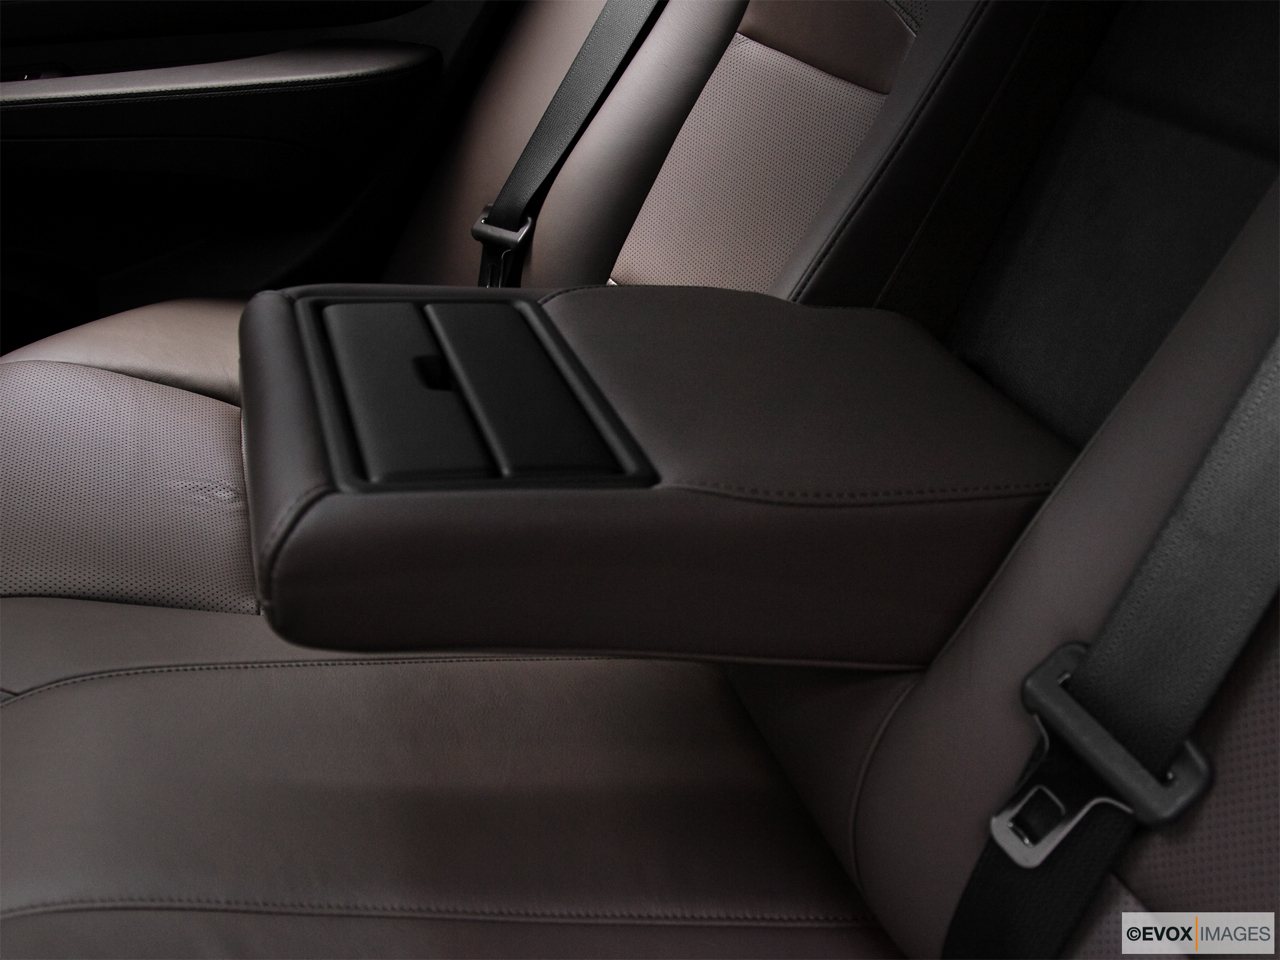 2010 Acura ZDX ZDX Advance Rear center console with closed lid from driver's side looking down. 